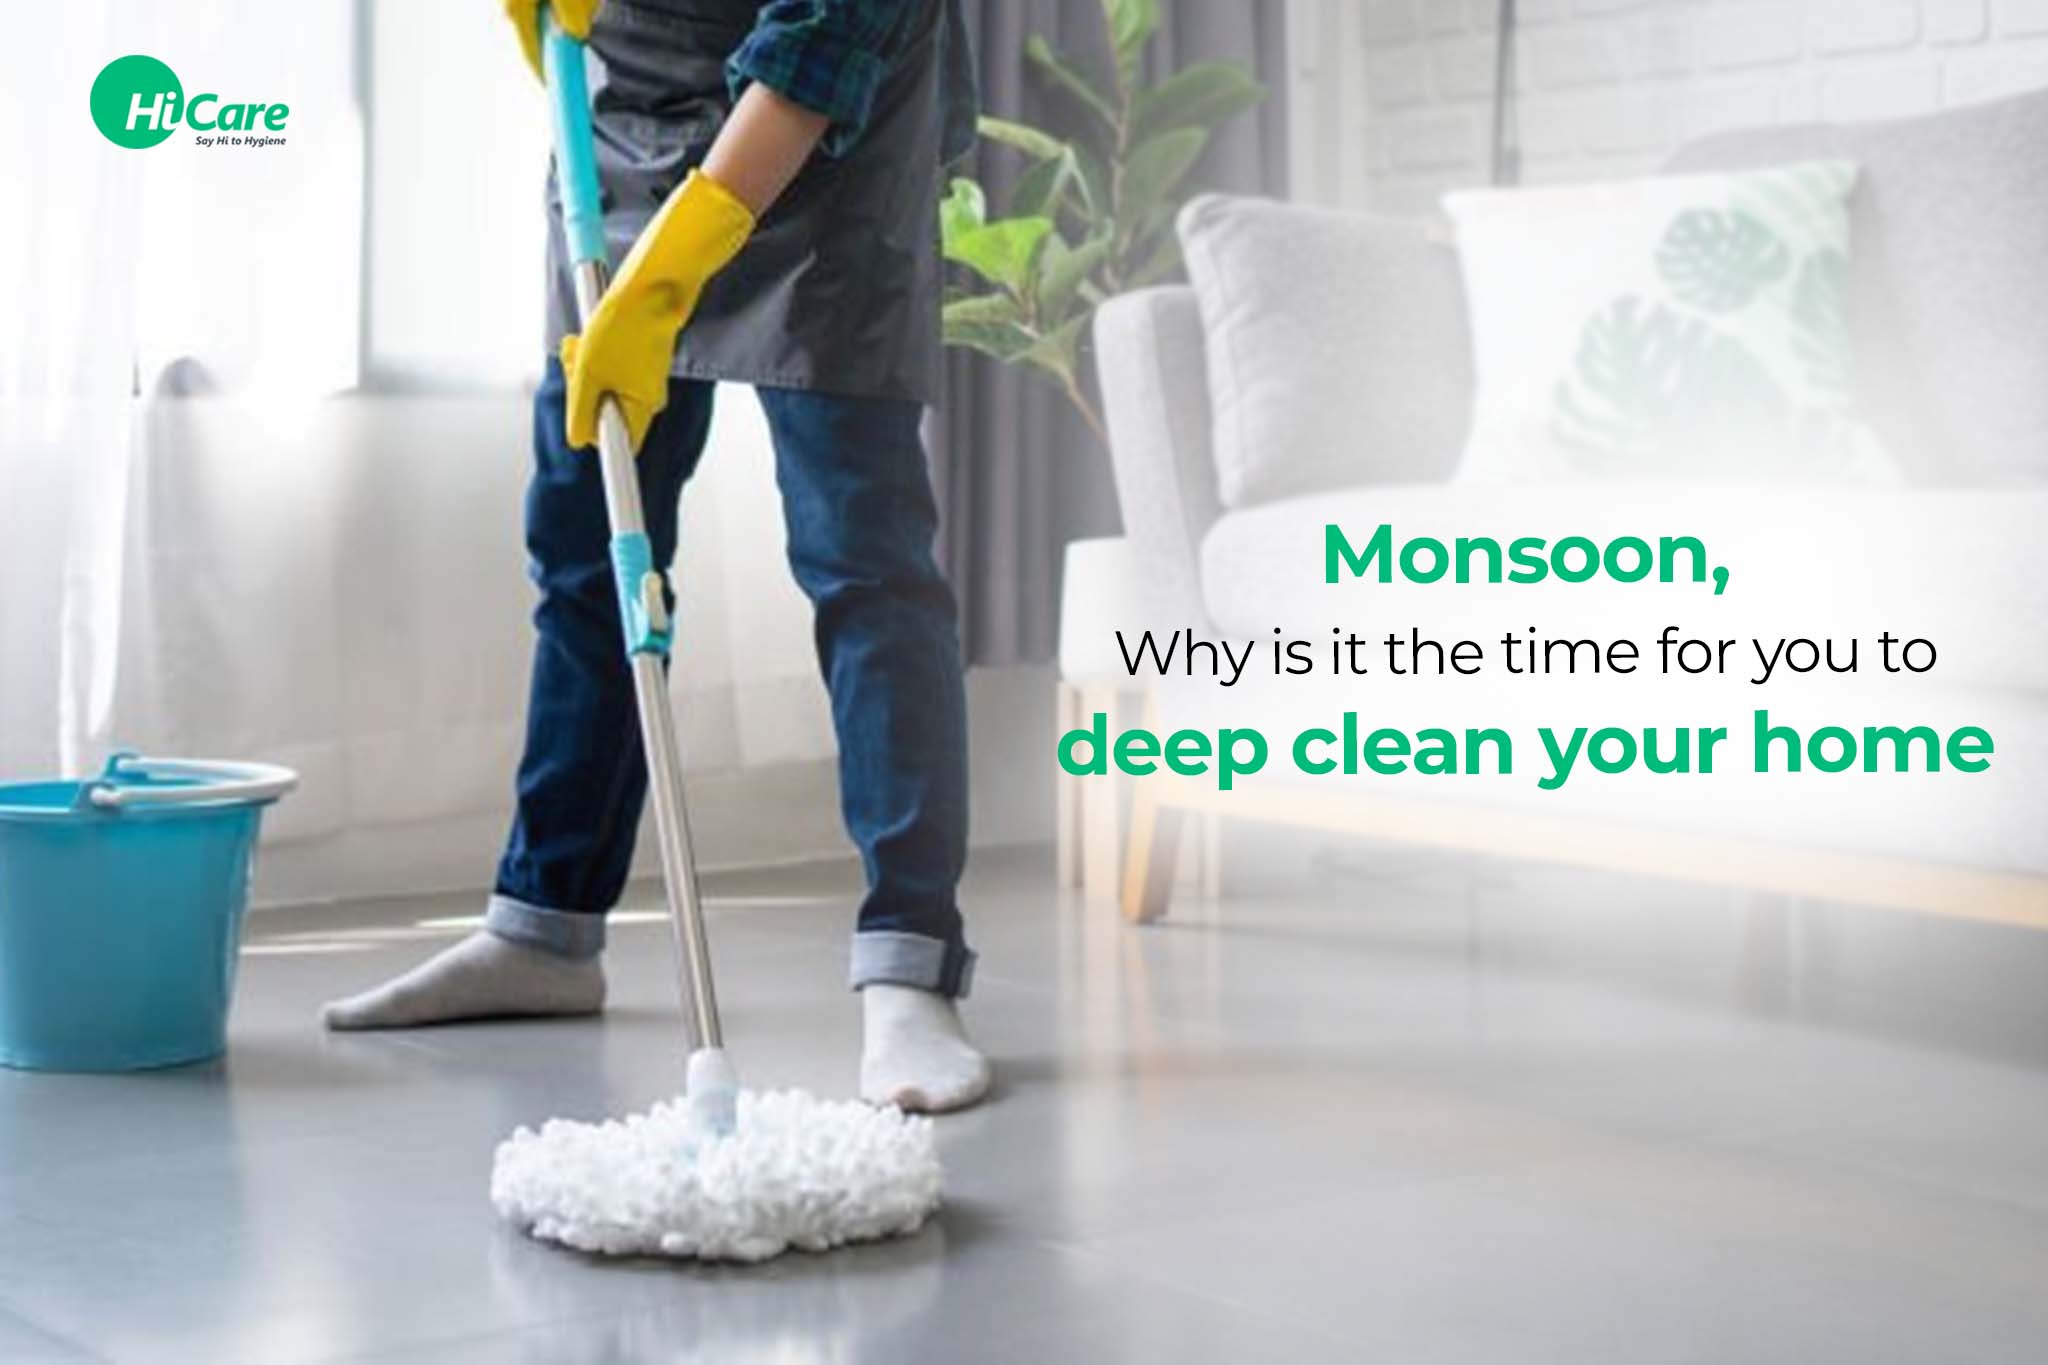 Monsoon, Why is it the time for you to deep clean your home?